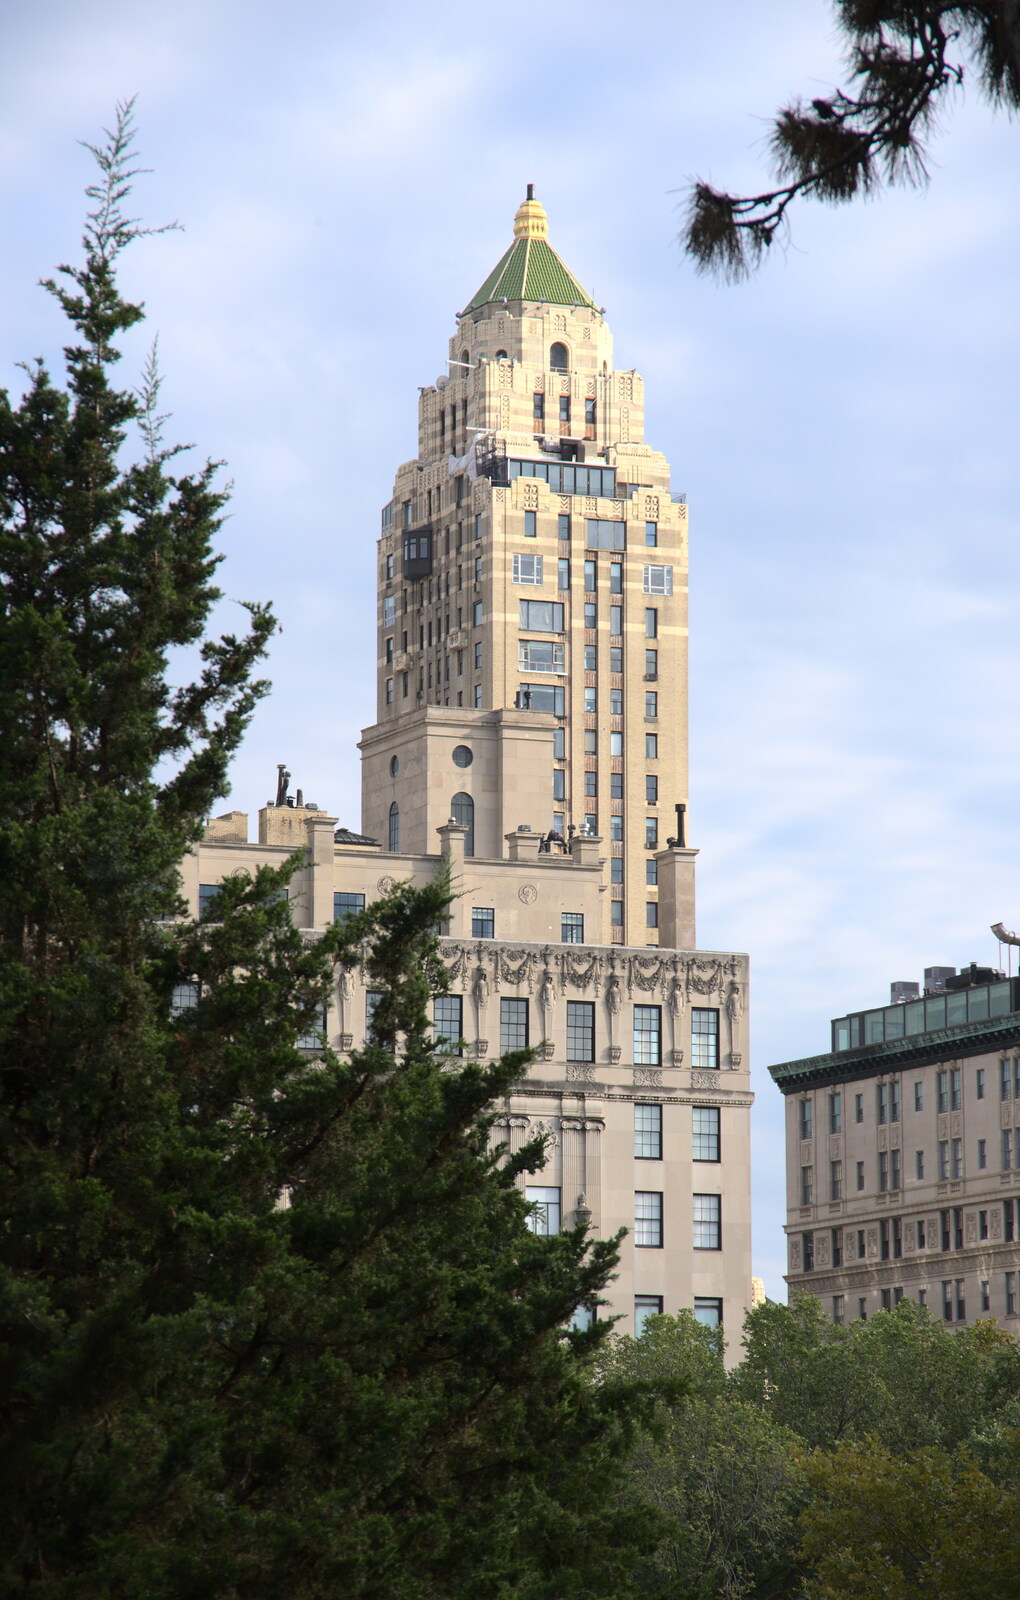 Nice building on the east of Central Park from Open-top Buses and a Day at the Museum, New York, United States - 22nd October 2018